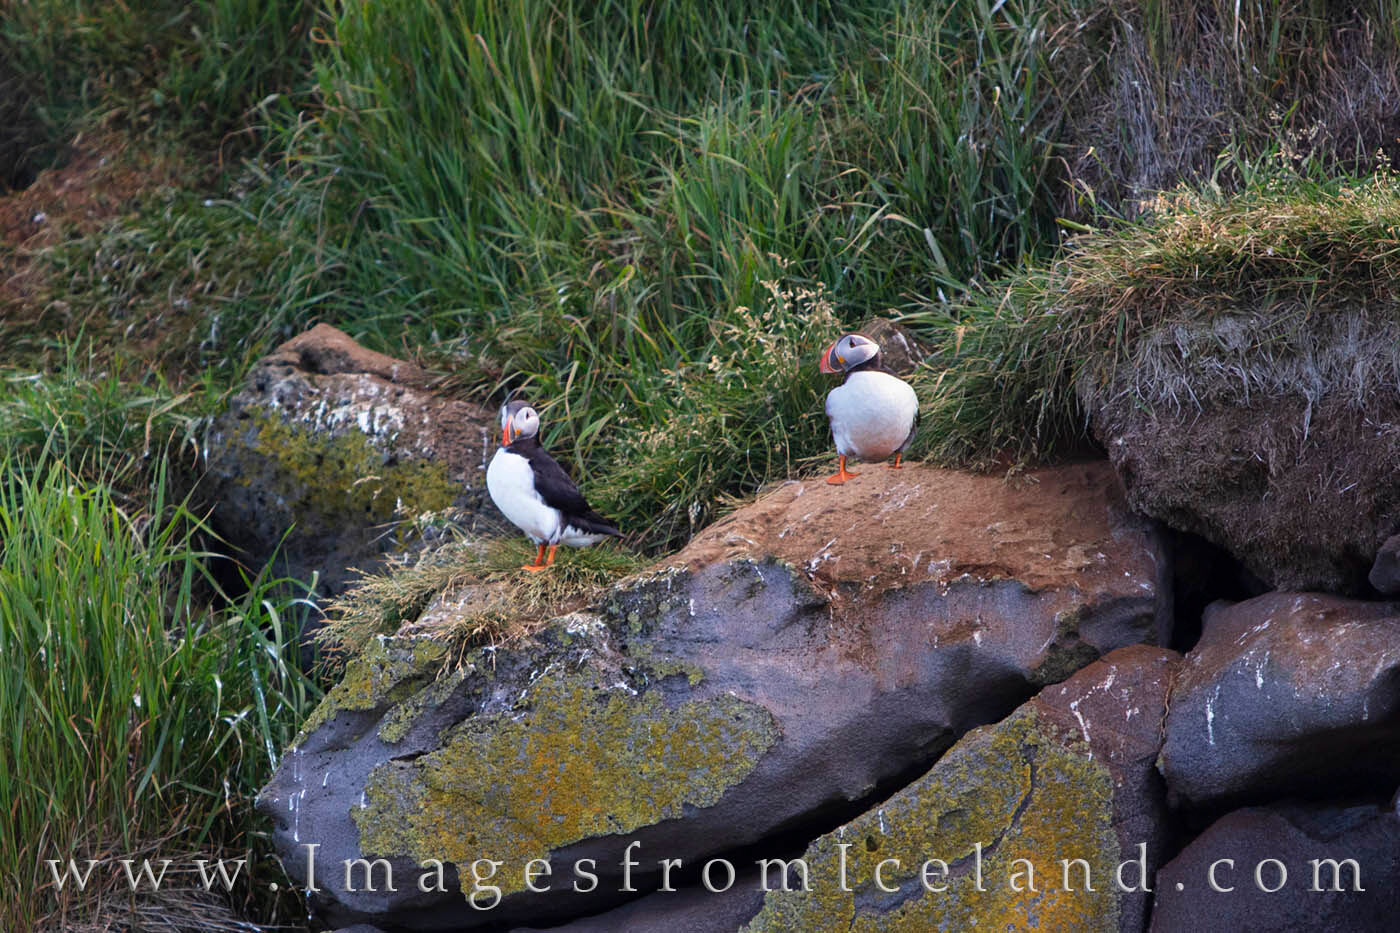 On a small island off the coast of west Iceland, puffins take a break on a rock after foraging for food.